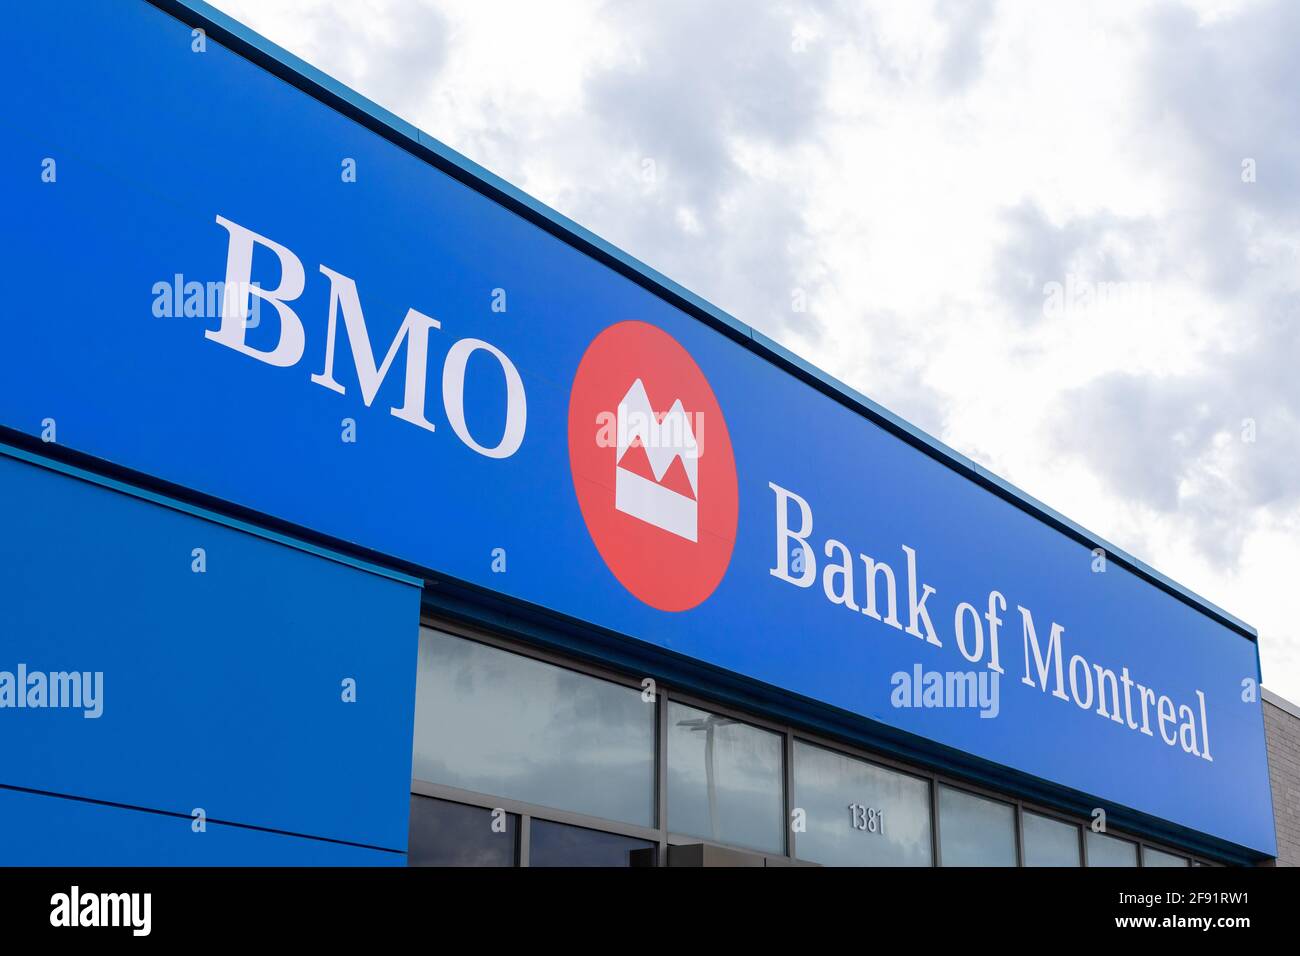 Ottawa, Canada - April 10, 2021: BMO, Bank of Montreal branch building in Canada Stock Photo